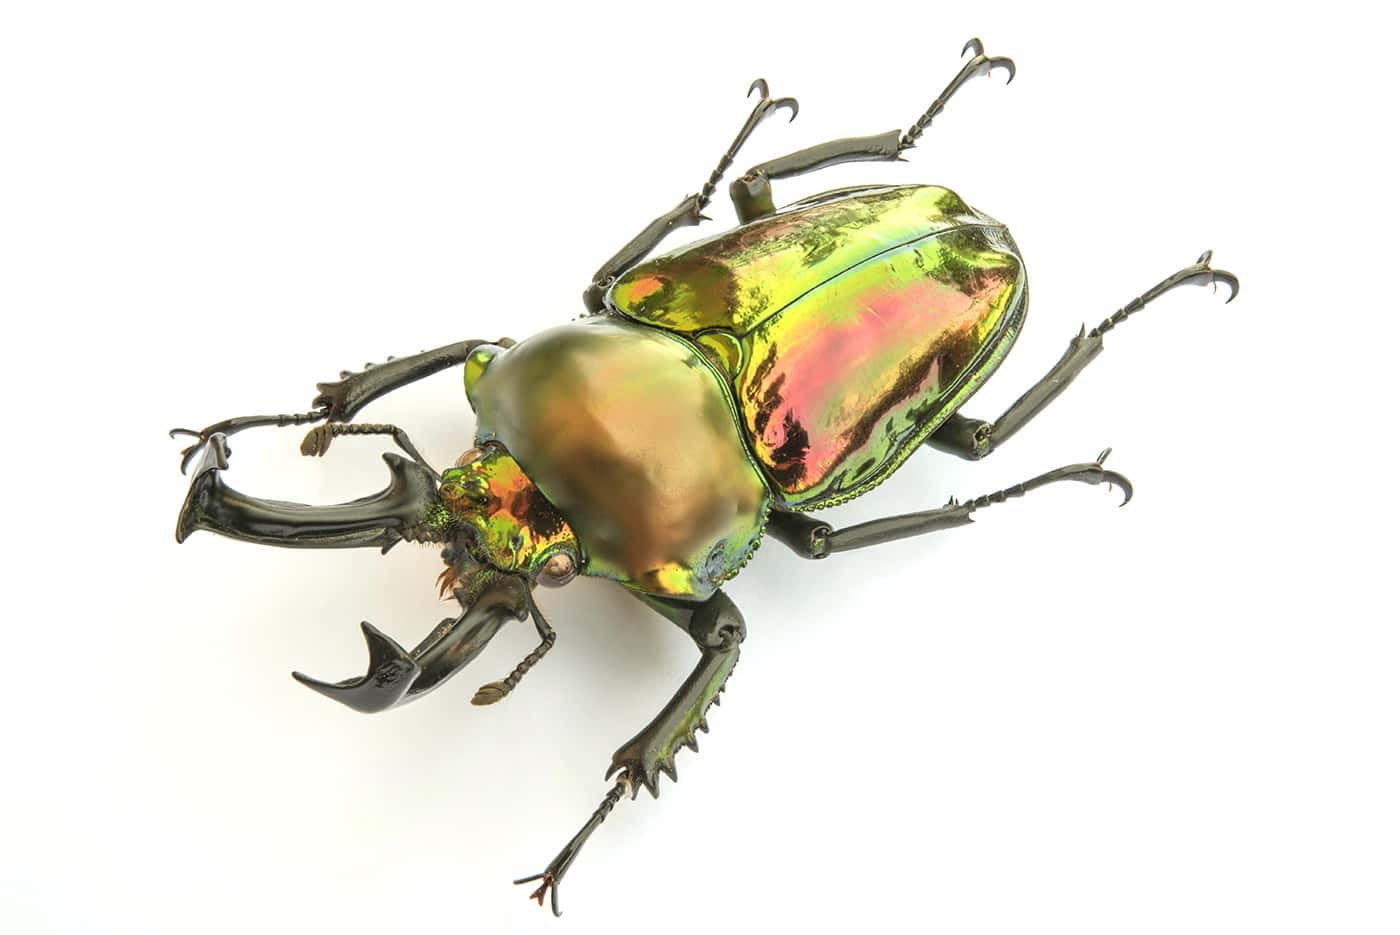 Jewel Beetles - Natural pieces of jewellery - Natural History